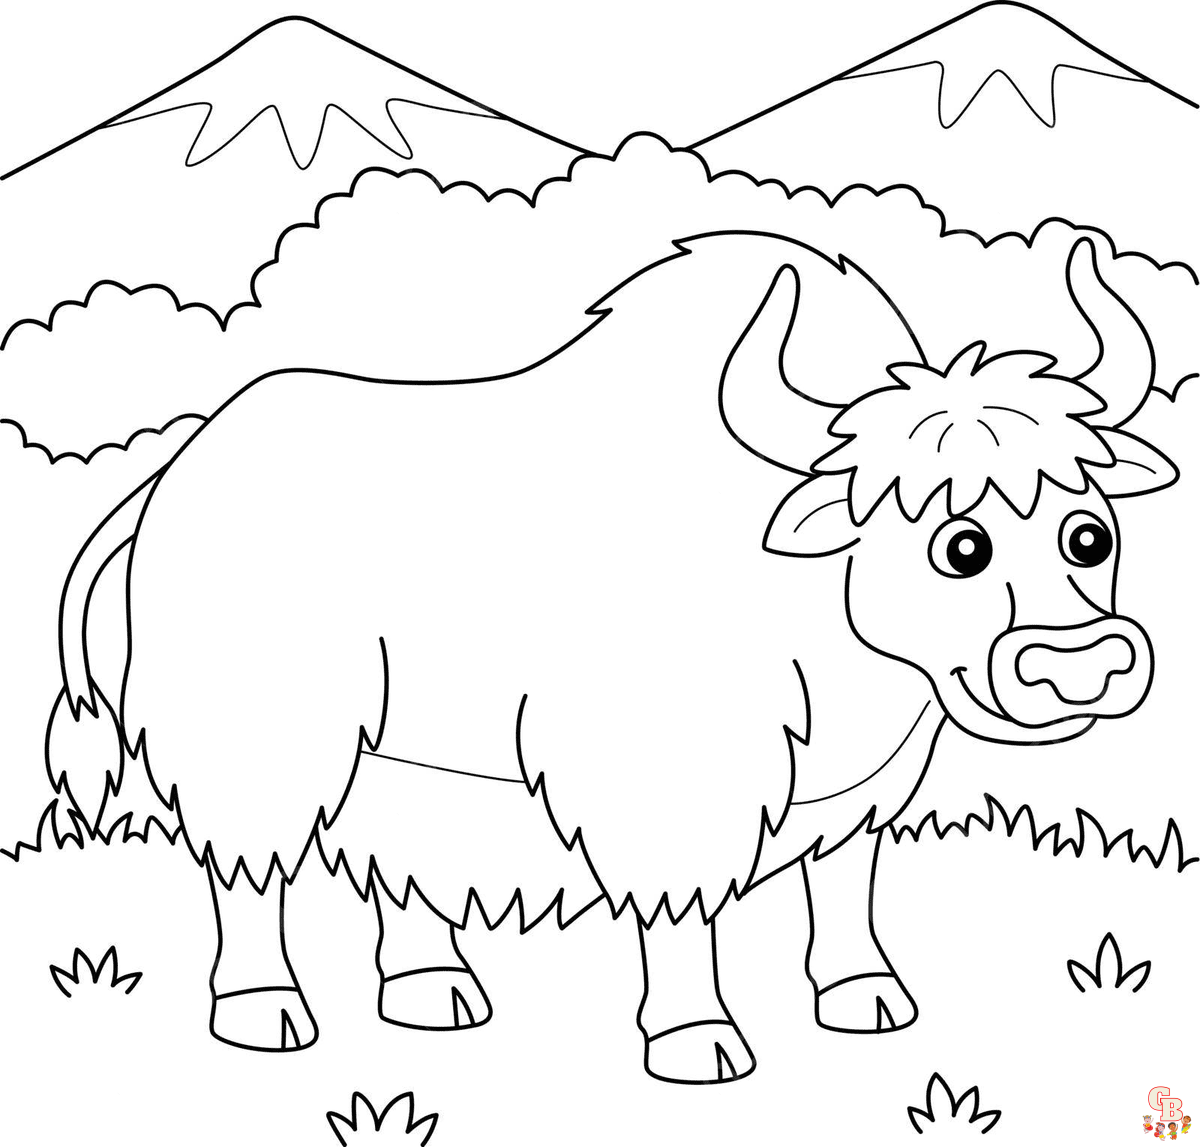 Yak coloring pages printable free